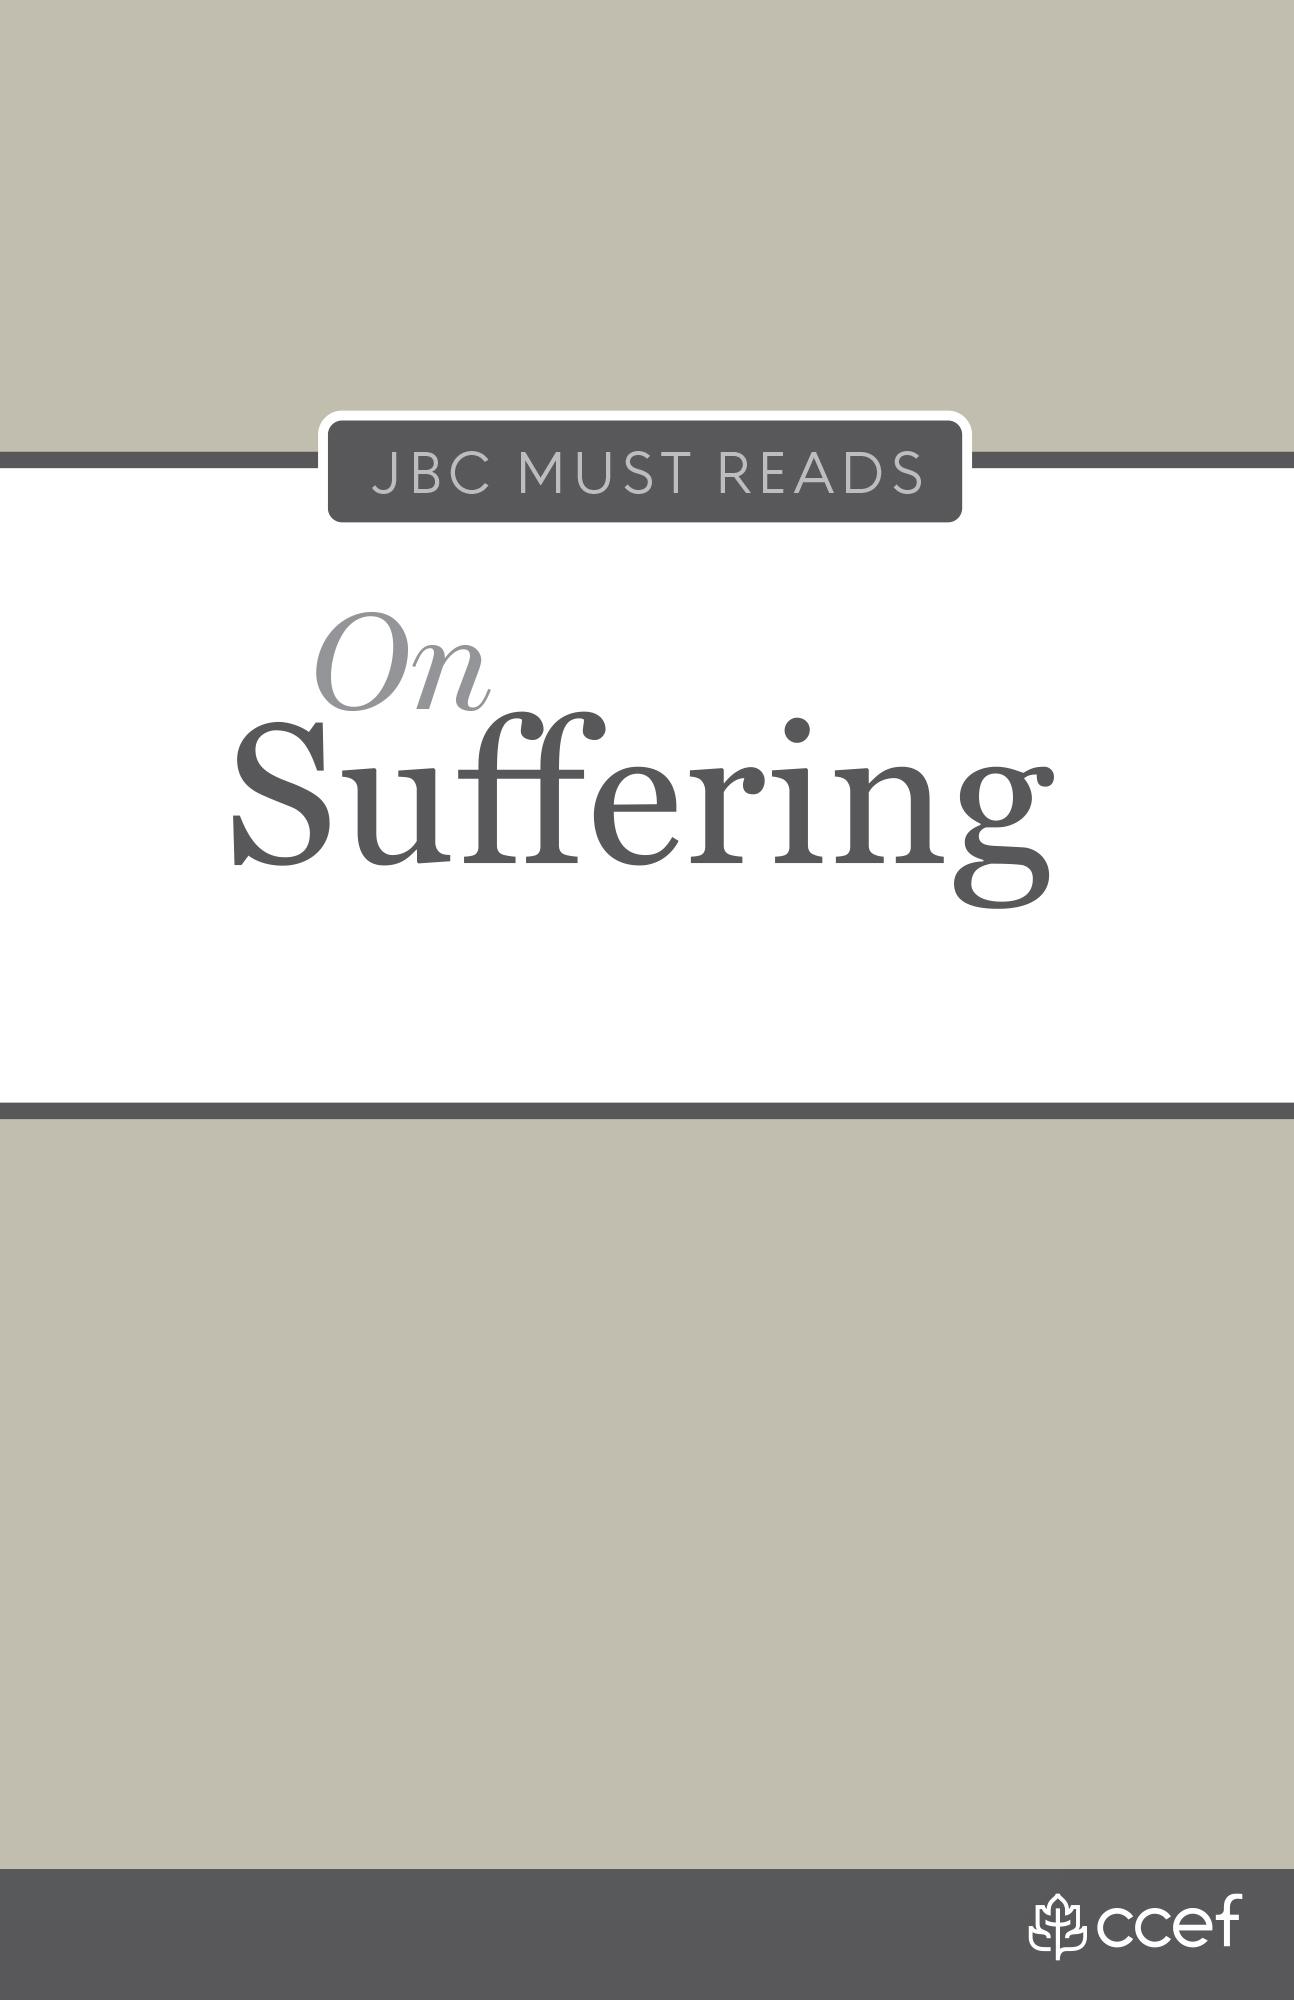 Book cover for JBC Must Reads: On Suffering